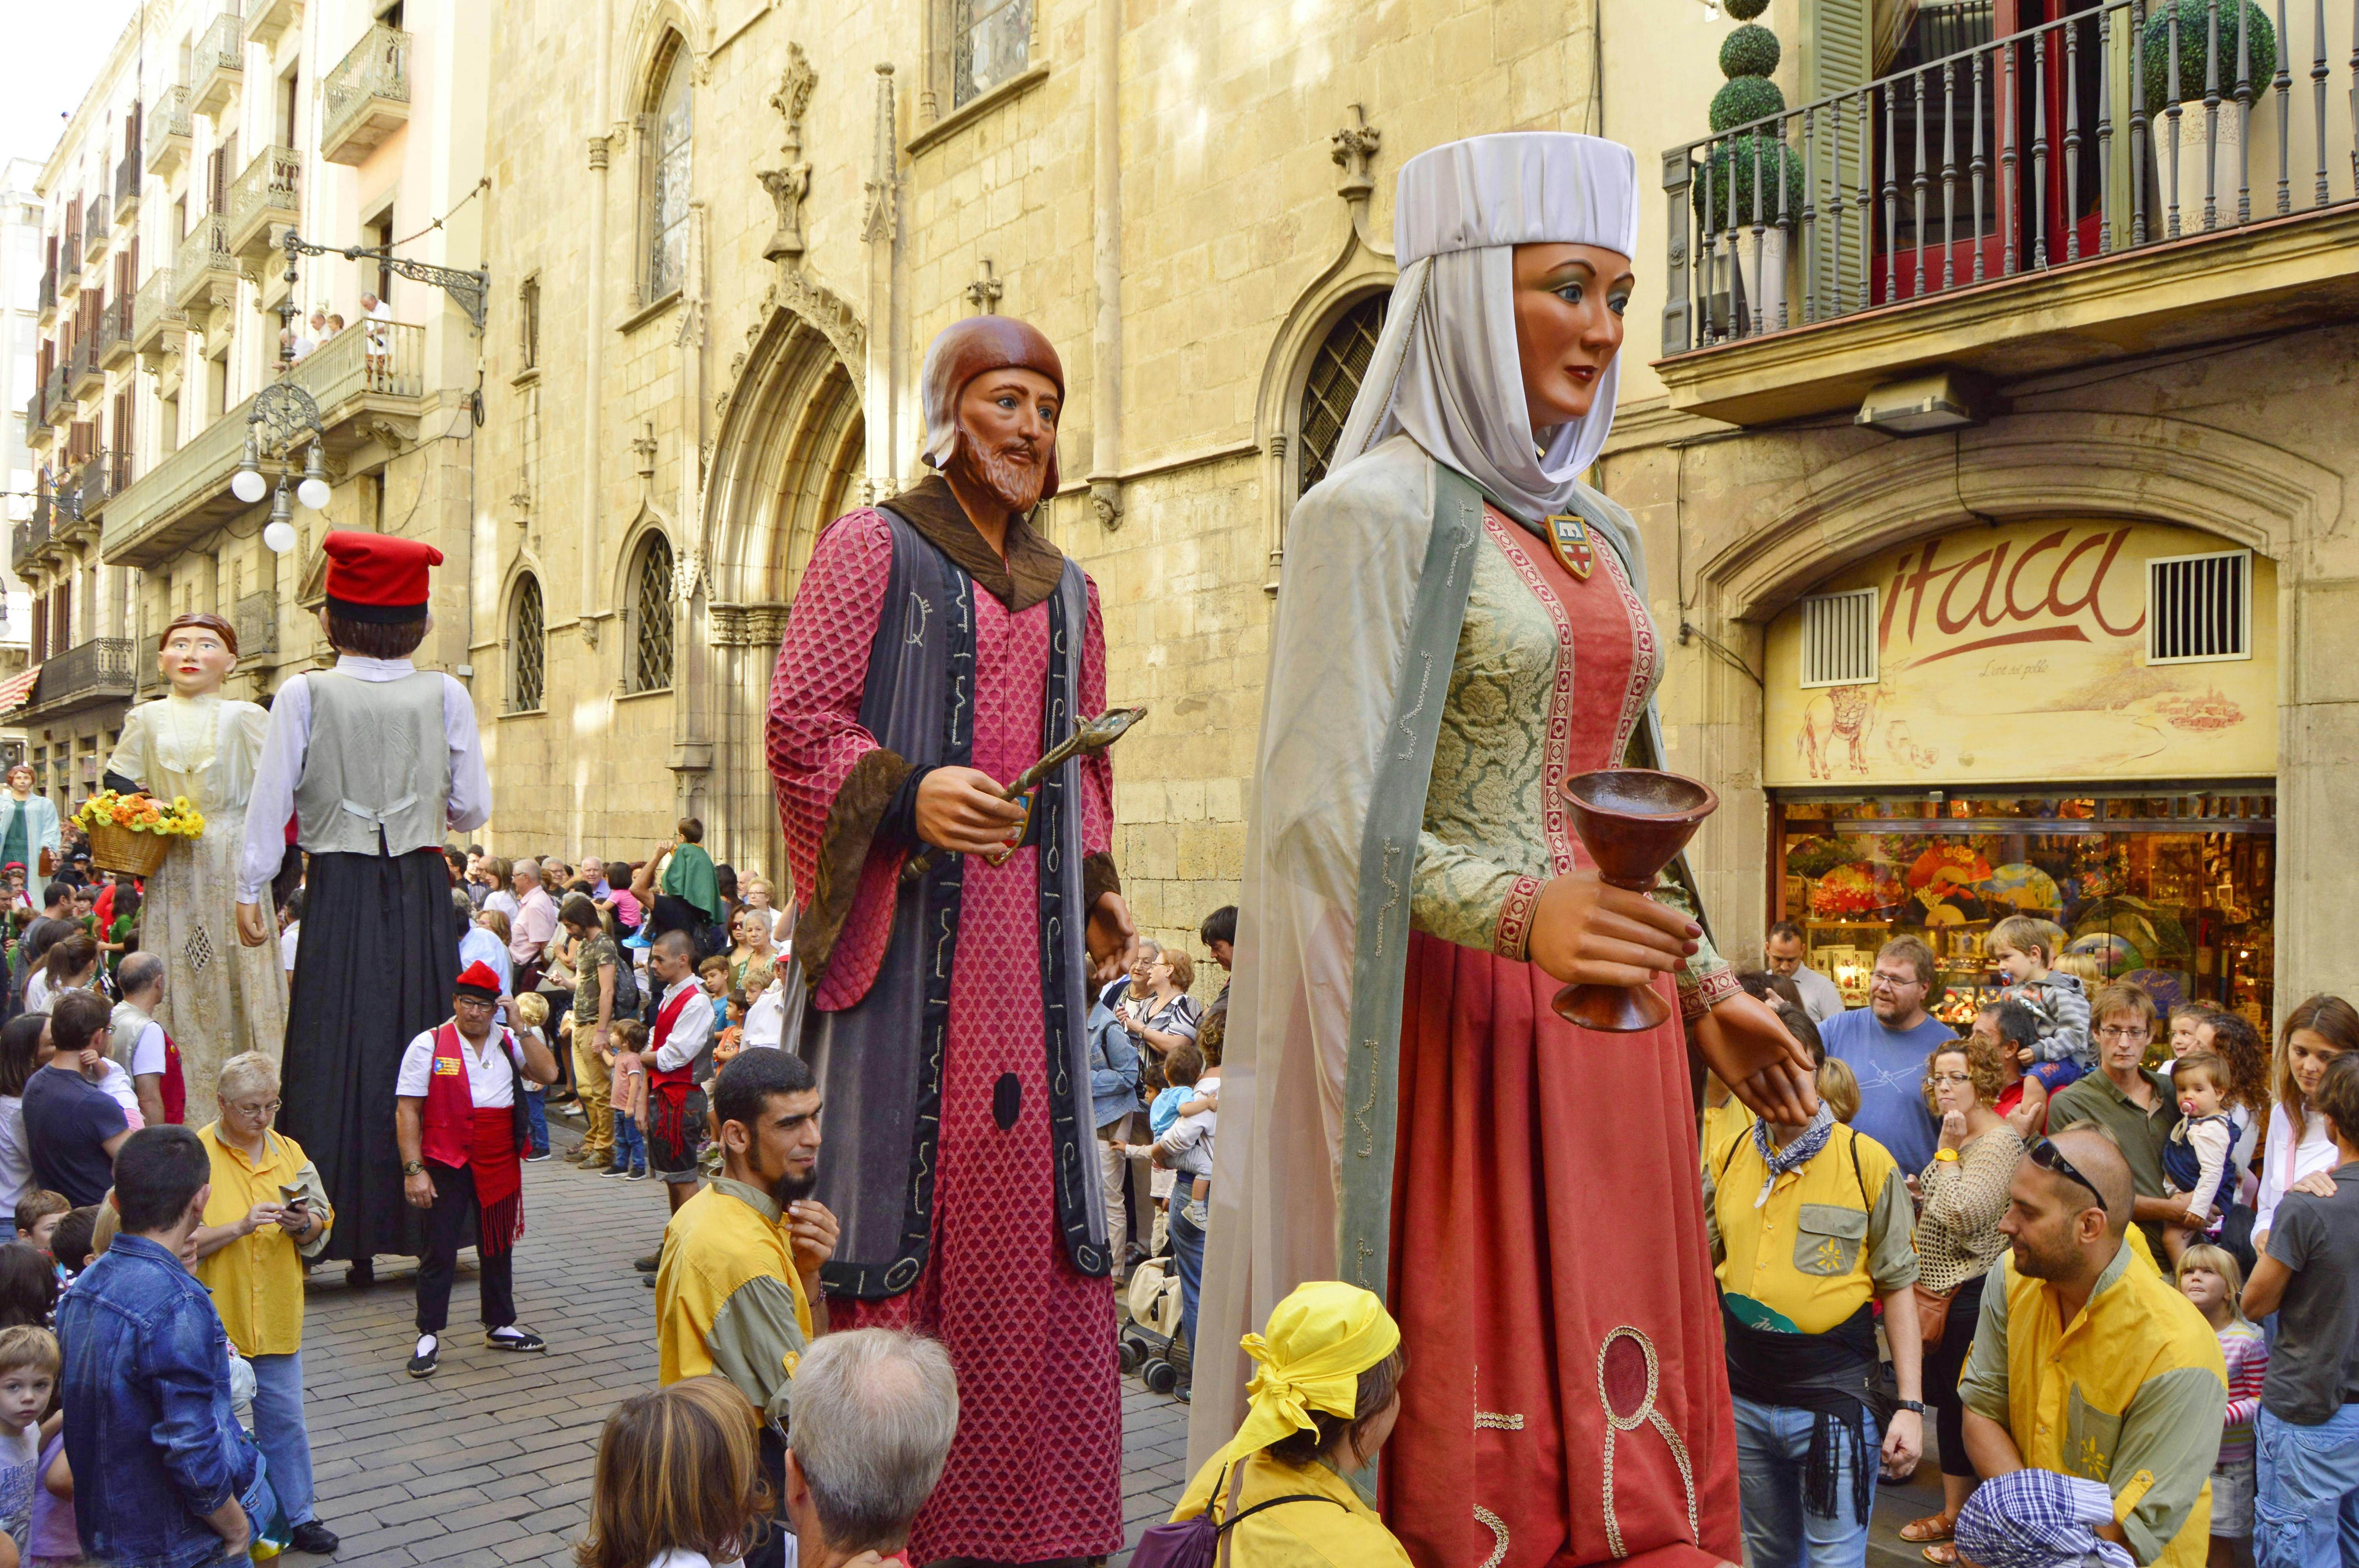 Colourful giants parading through La Rambla during La Mercè festival; the giants are made from papier-mâché and wear traditional religious dress, while onlookers watch the procession.